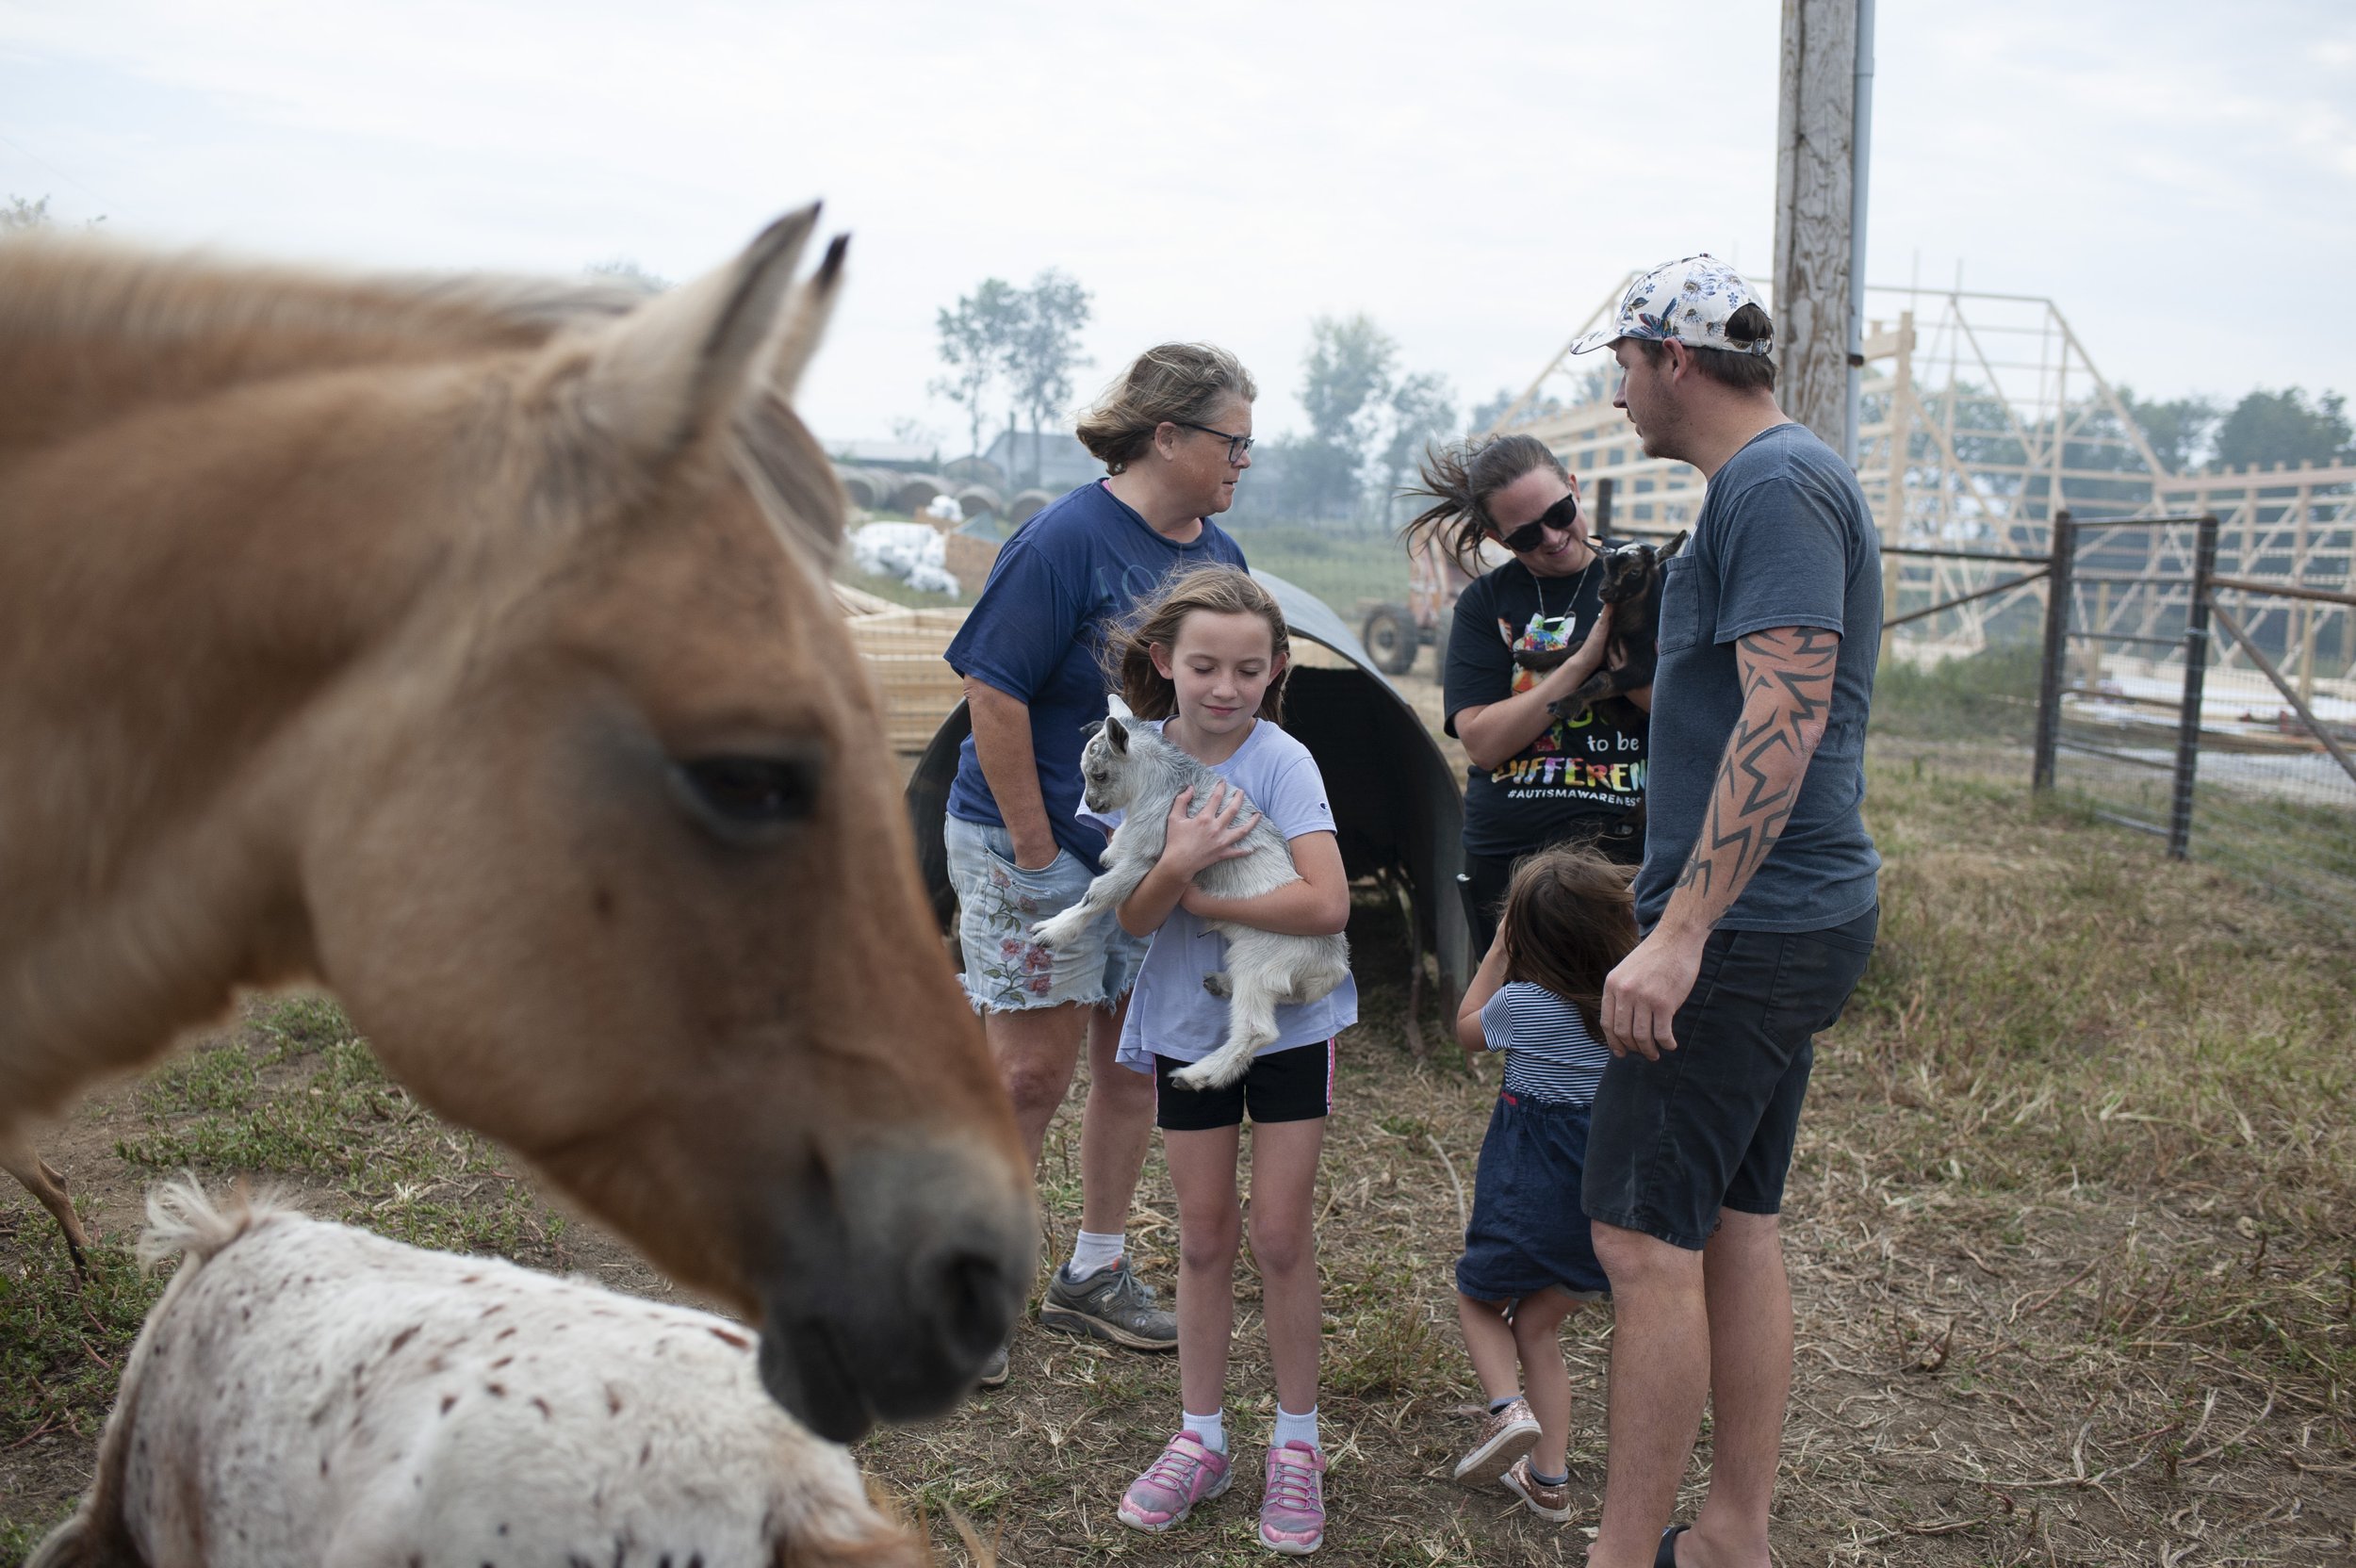  Members of the Pensick family including 8-year-old Rylee (center), 3-year-old Haylee, Liz and Joe meet with Mary about purchasing young goats at her farm. Mary breeds goats and horses. 